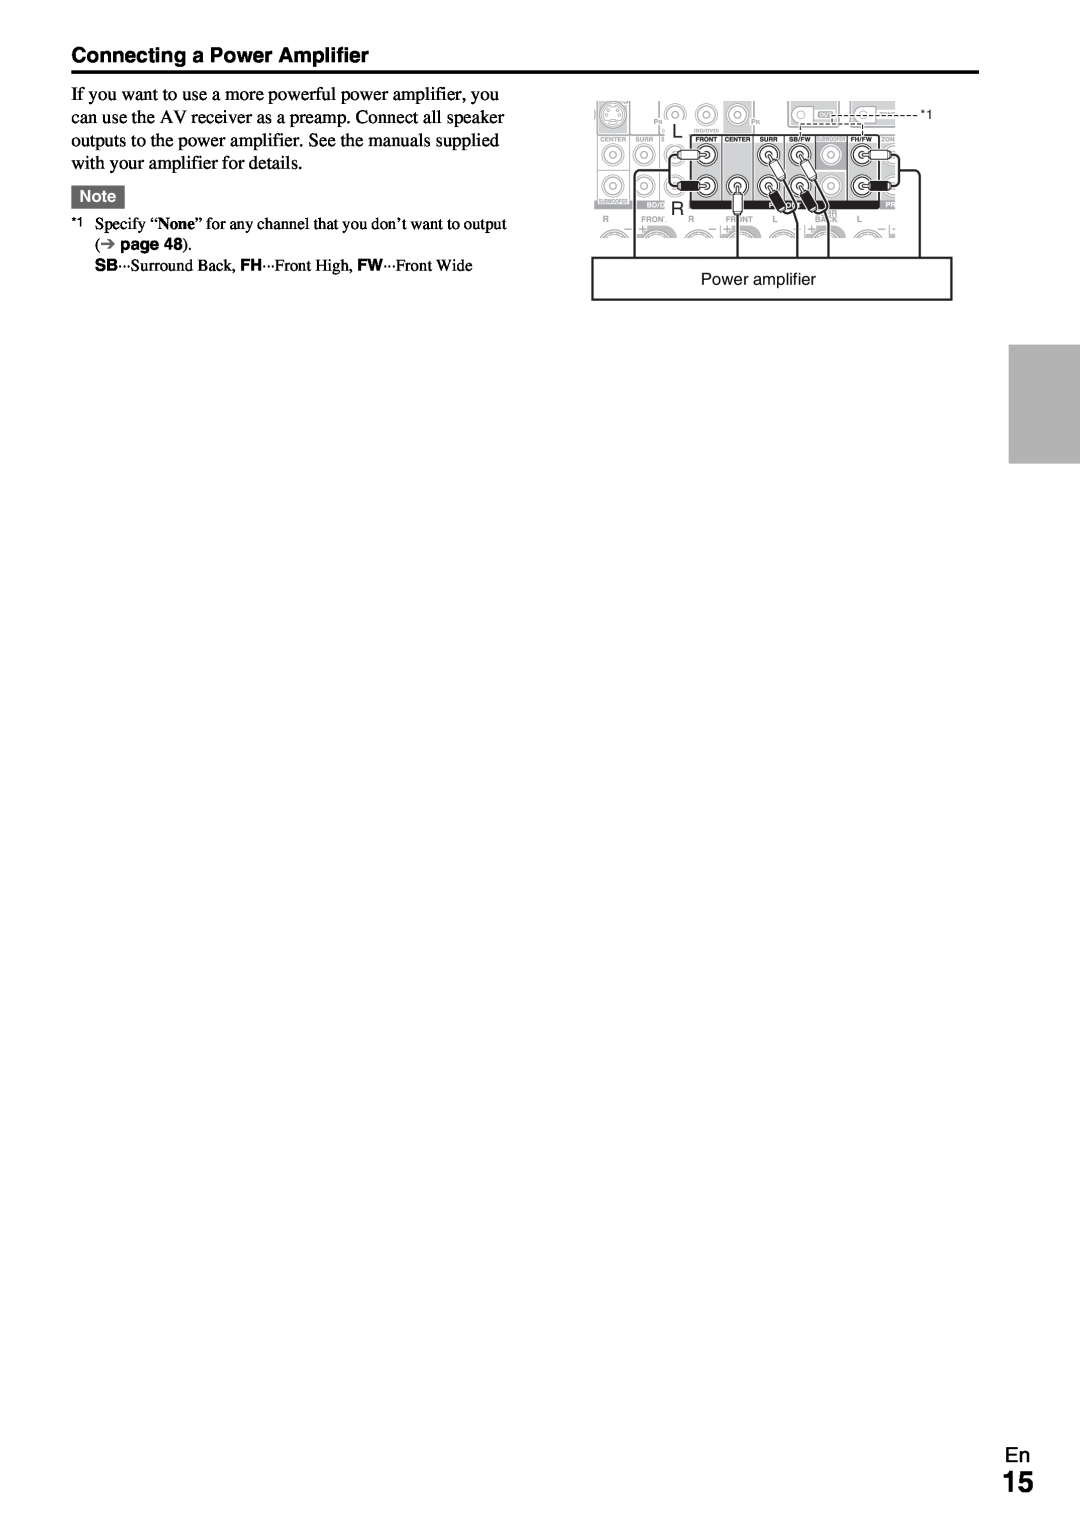 Onkyo TX-NR1009 instruction manual Connecting a Power Amplifier 